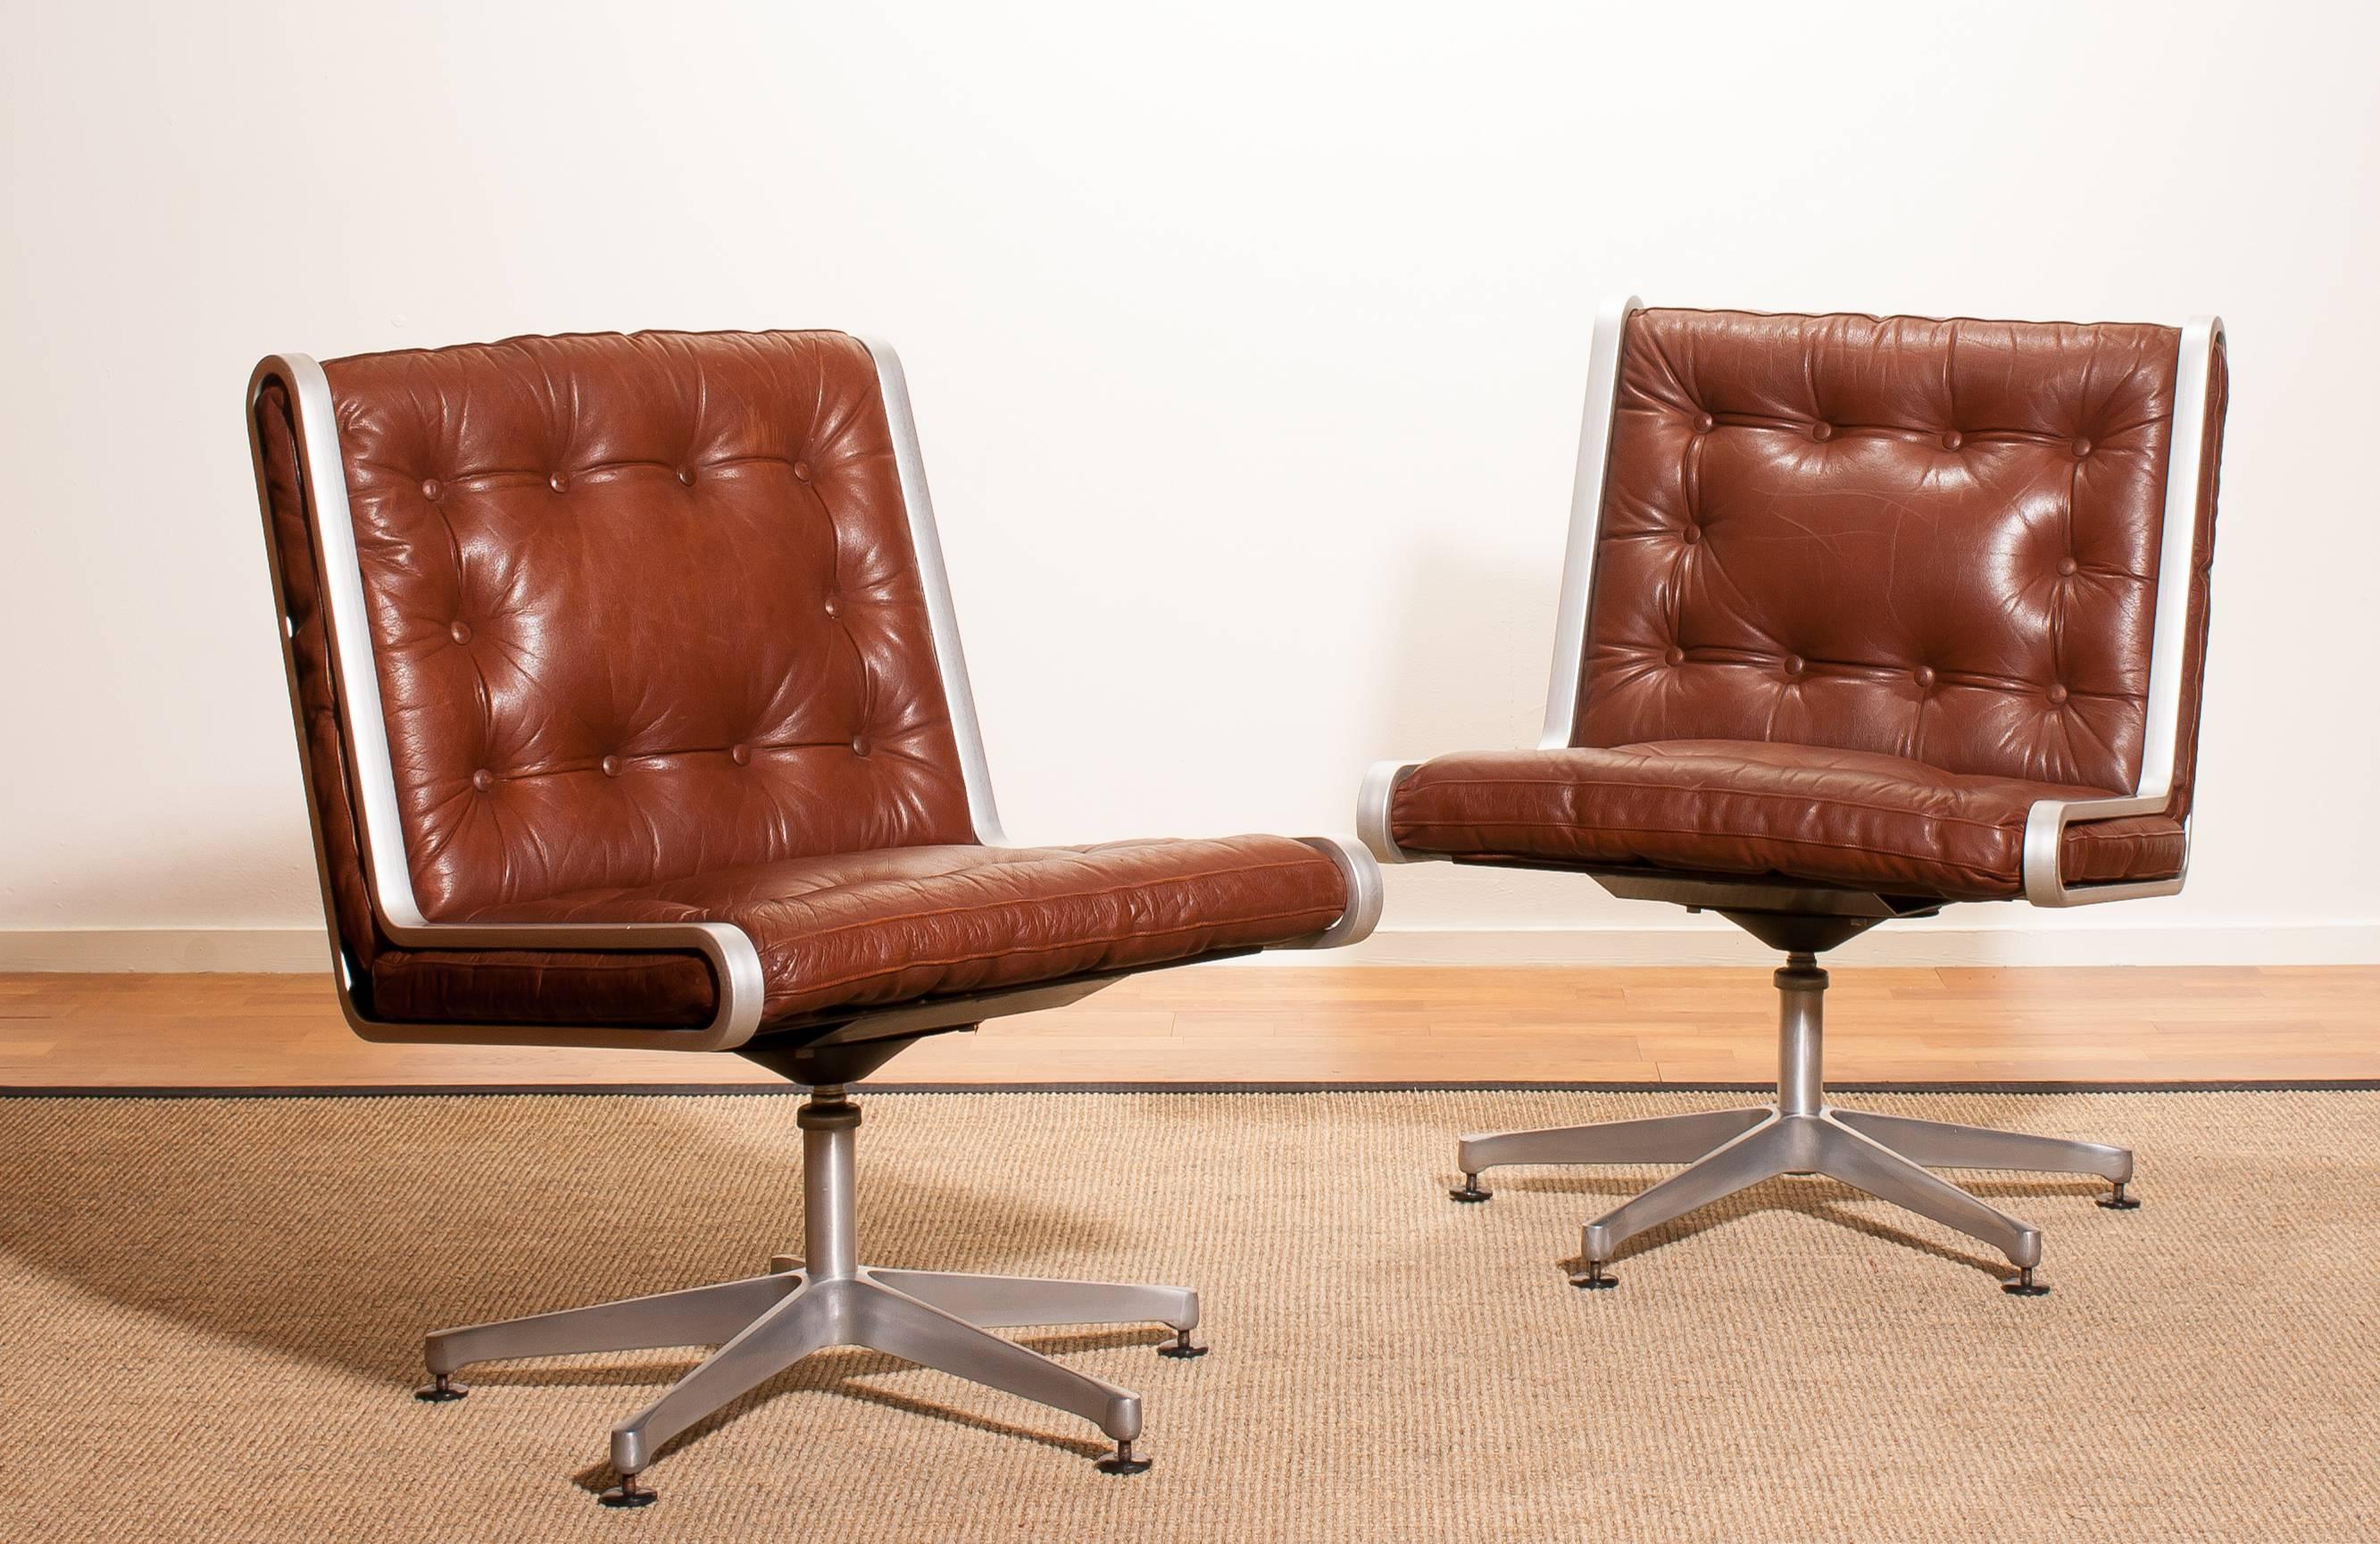 Very nice pair of swivel chairs.
These chairs are made of a brown leather seating on an aluminium swivel base.
They are in a beautiful condition.
Period 1970s
Dimensions H 82 cm, W 60 cm, D 57 cm, Sh 45 cm.